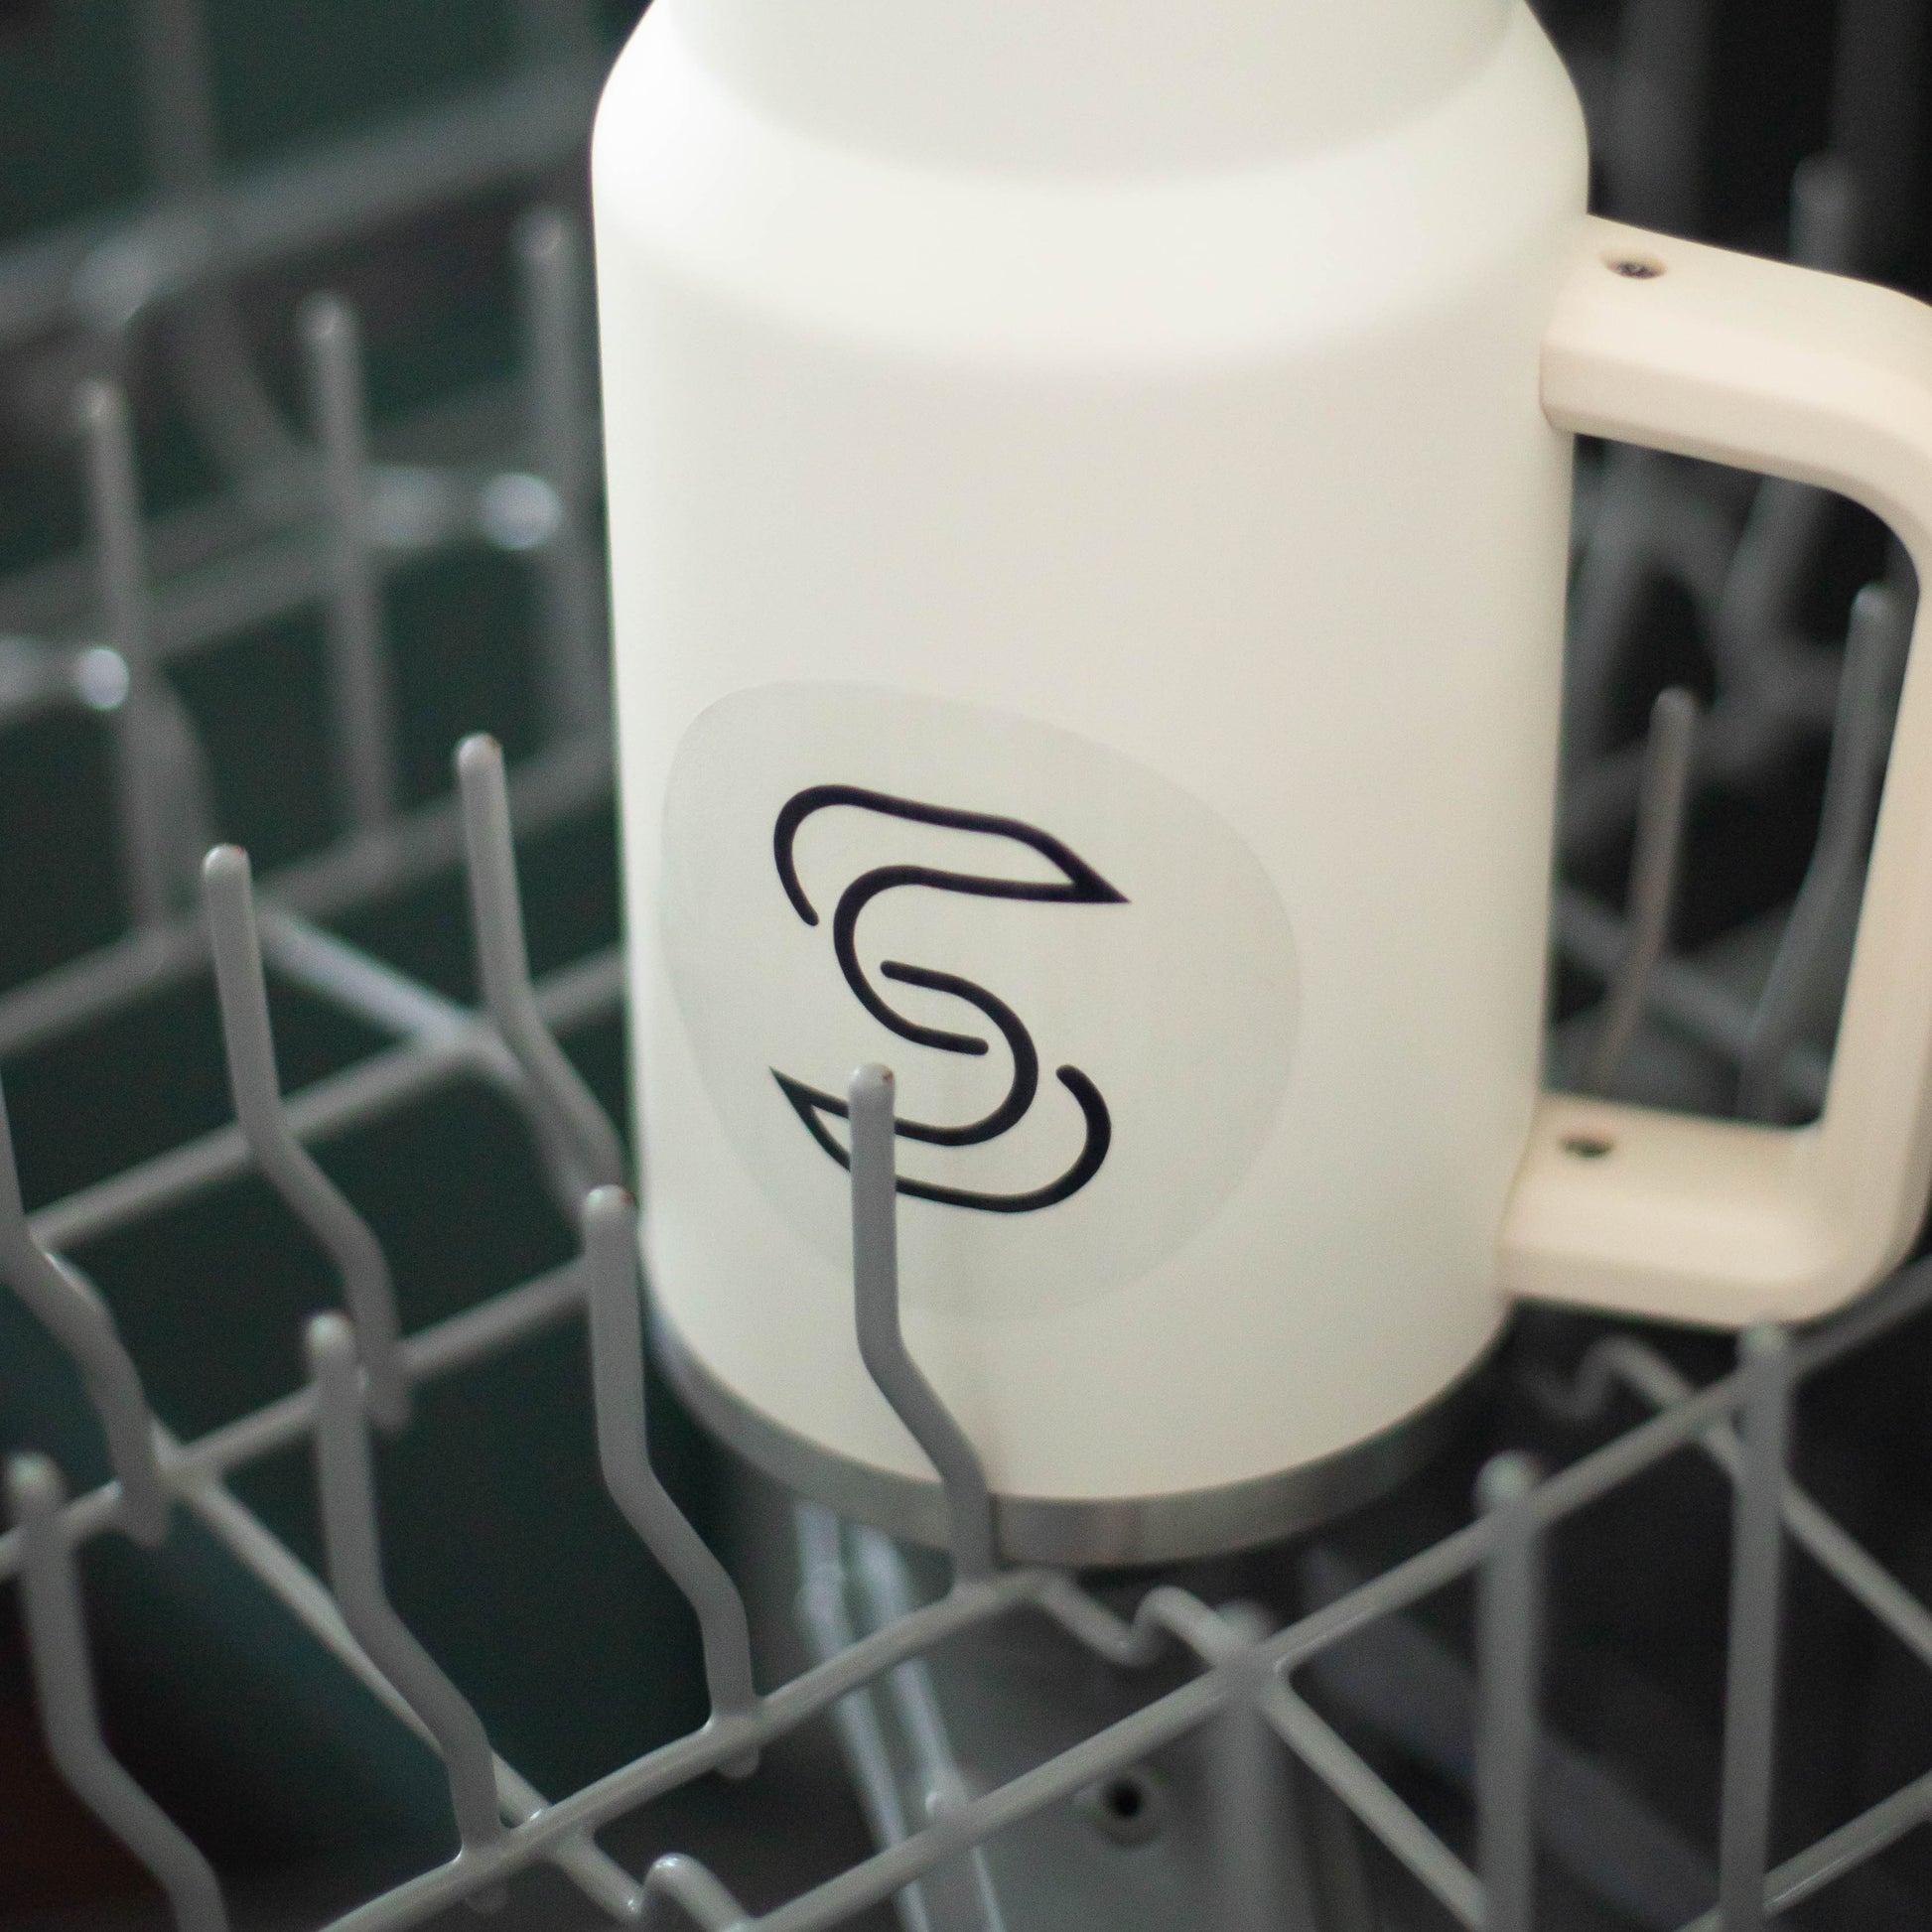 A clear circular sticker of a black Stickr logo on a water bottle in a dishwasher